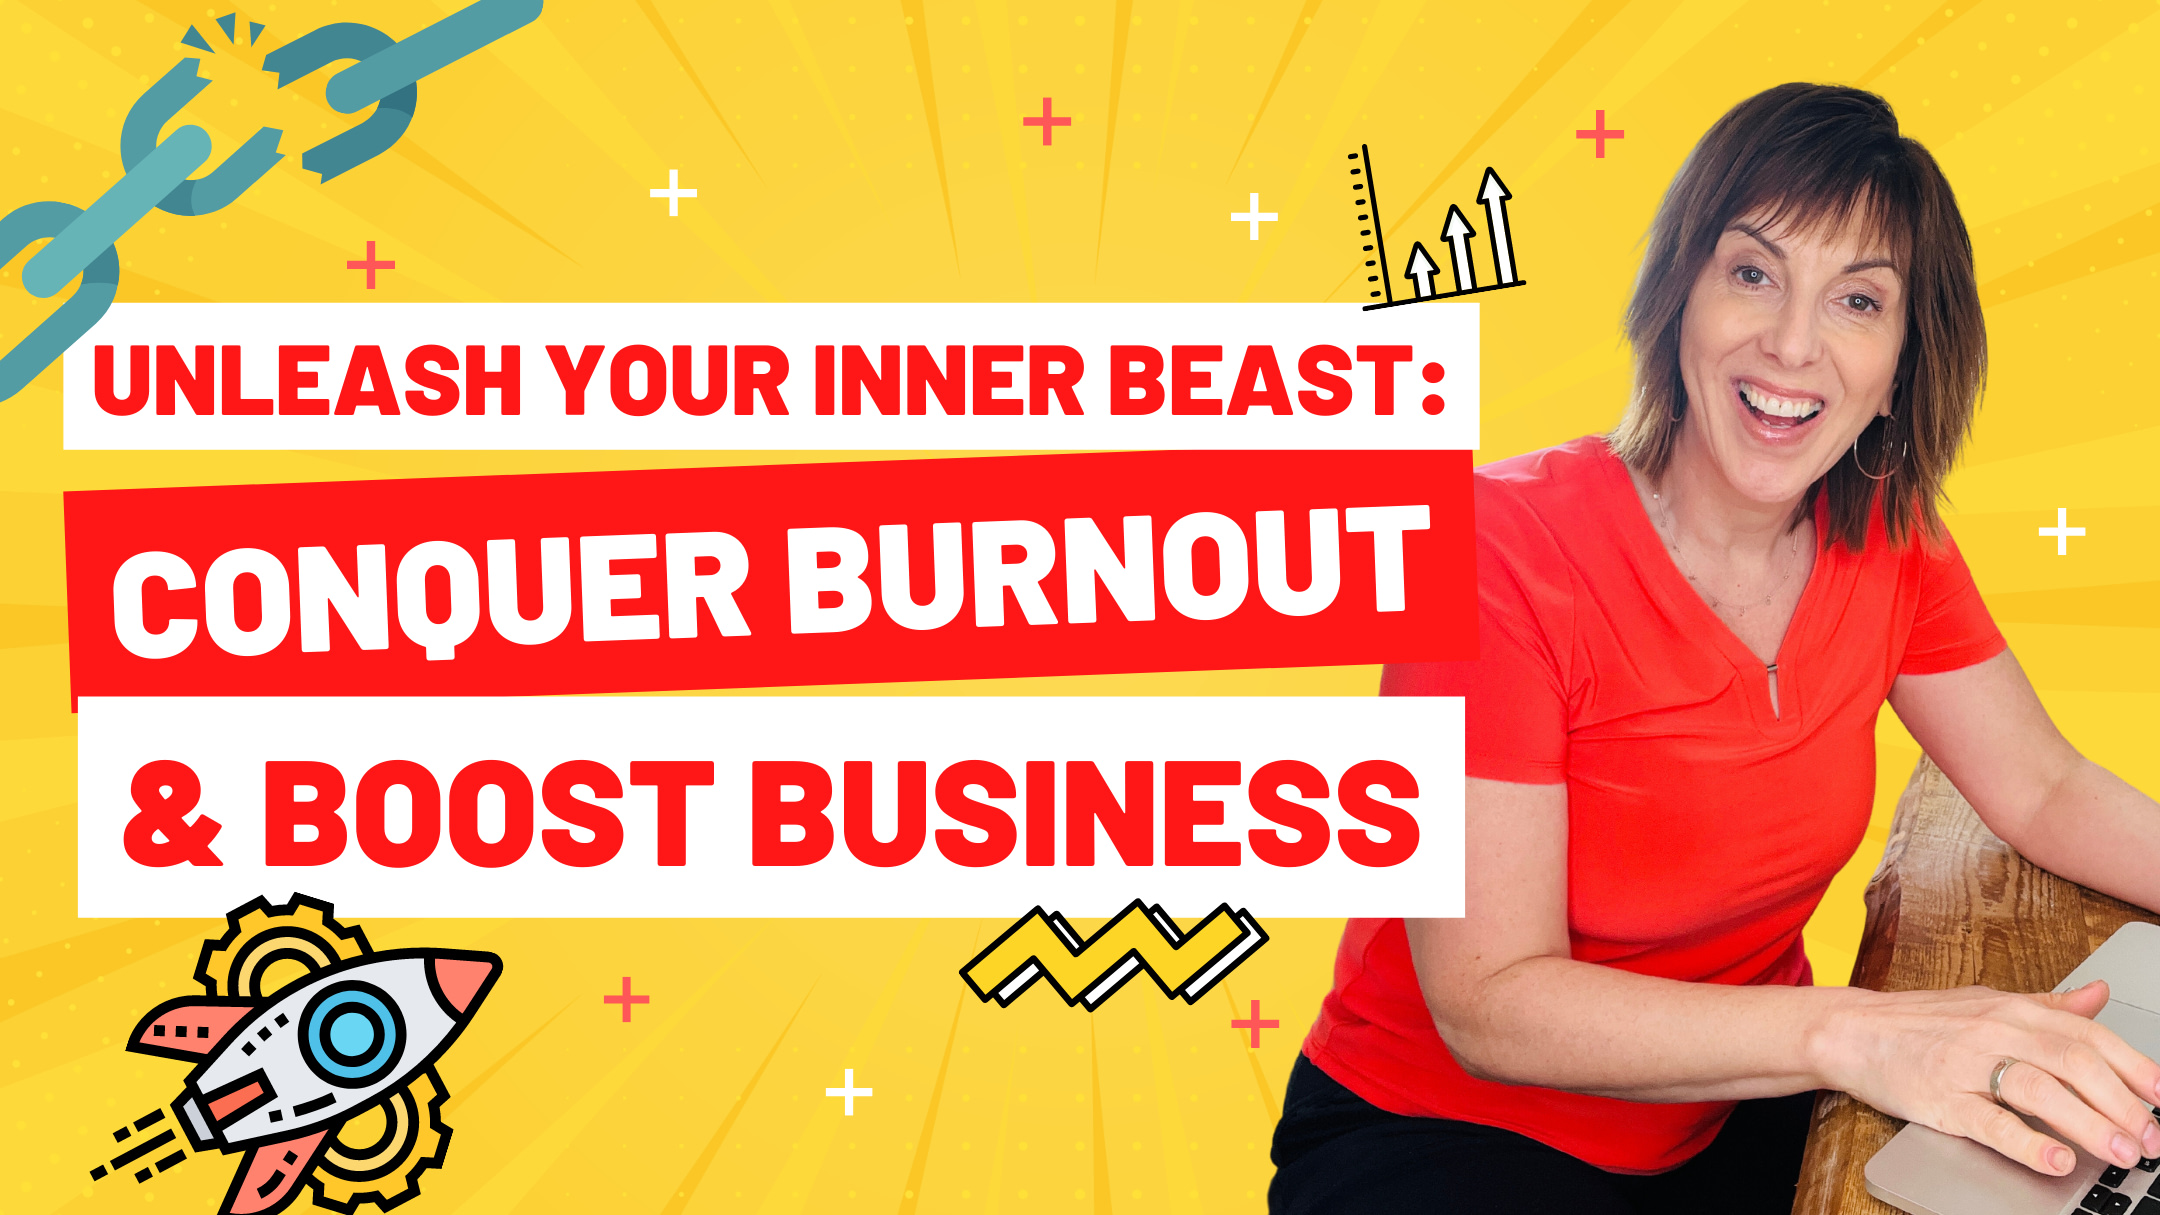 Unleash Your Inner Beast: Conquer Burnout & Boost Business